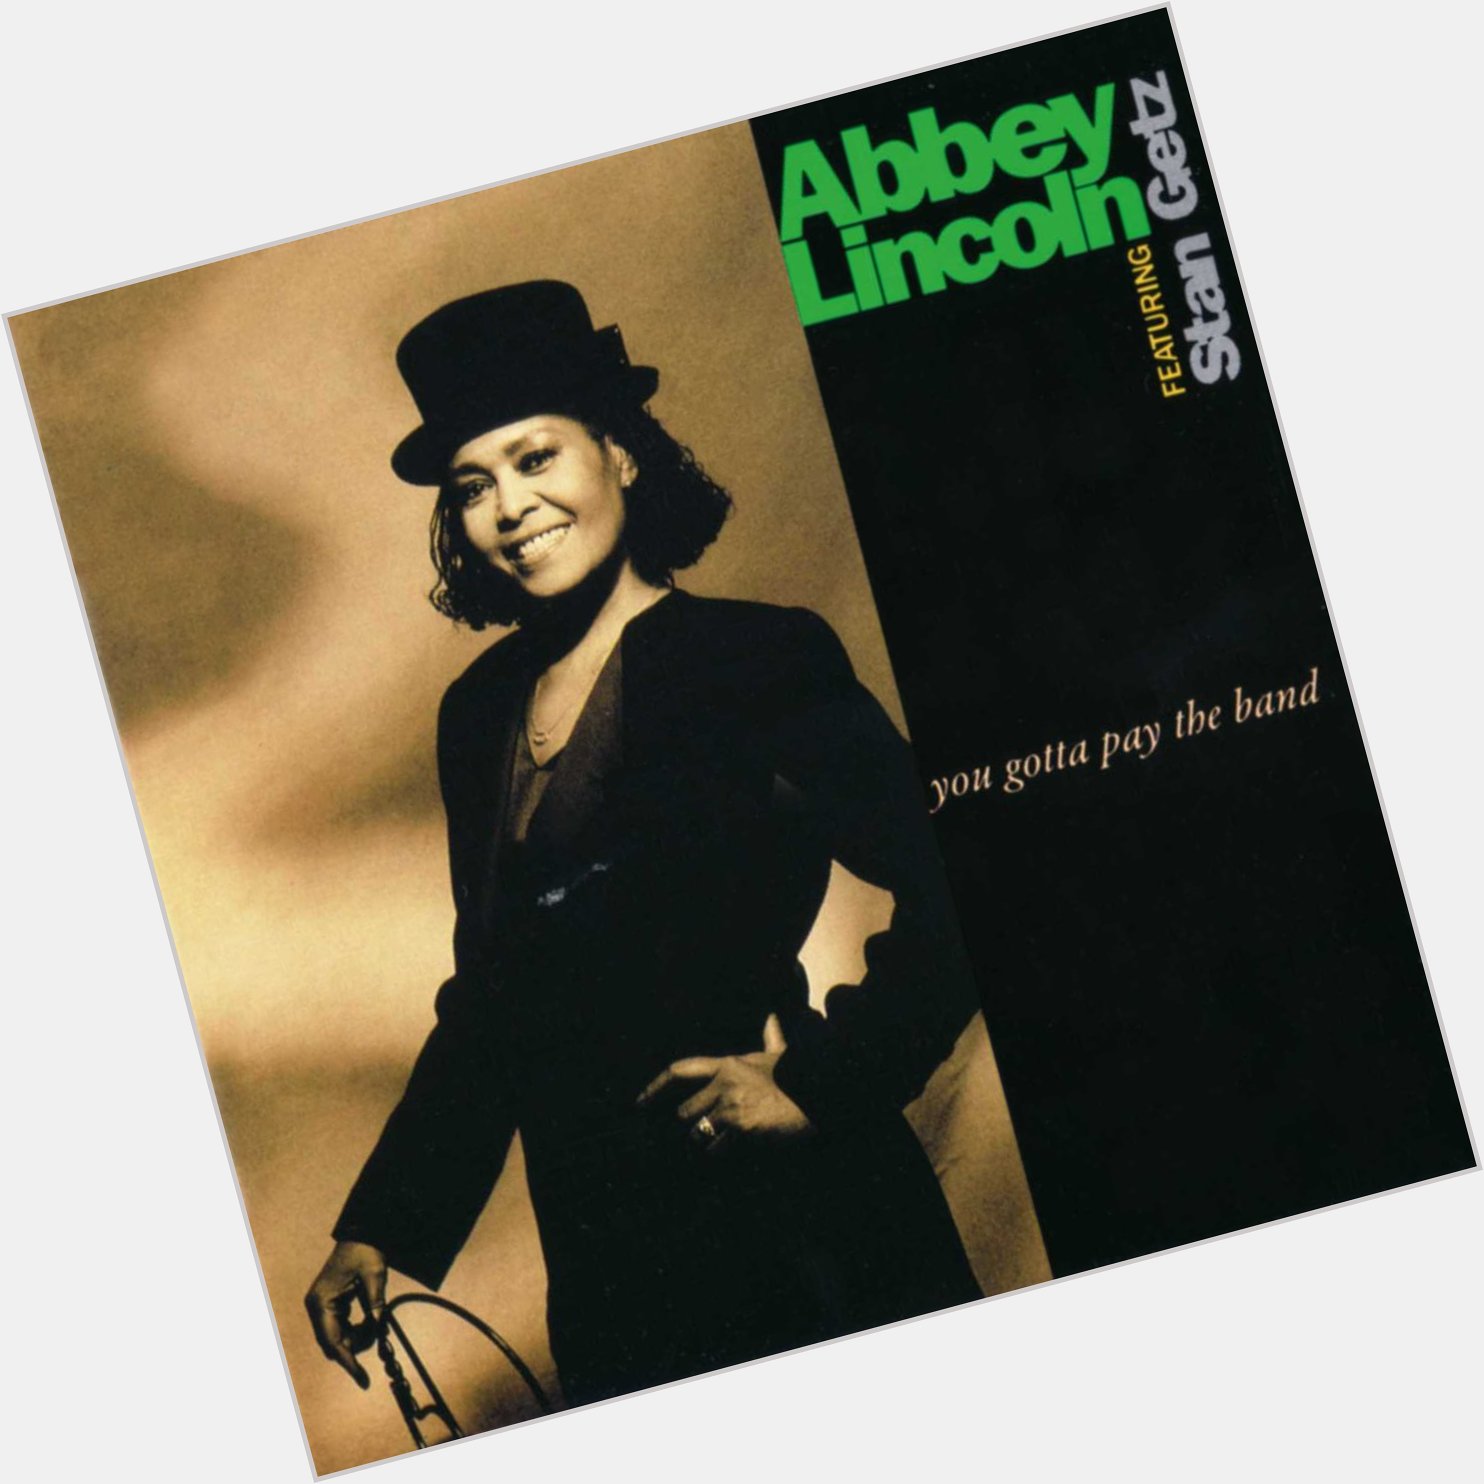 Record Of The Day! Happy Birthday Lady Abbey Lincoln! 